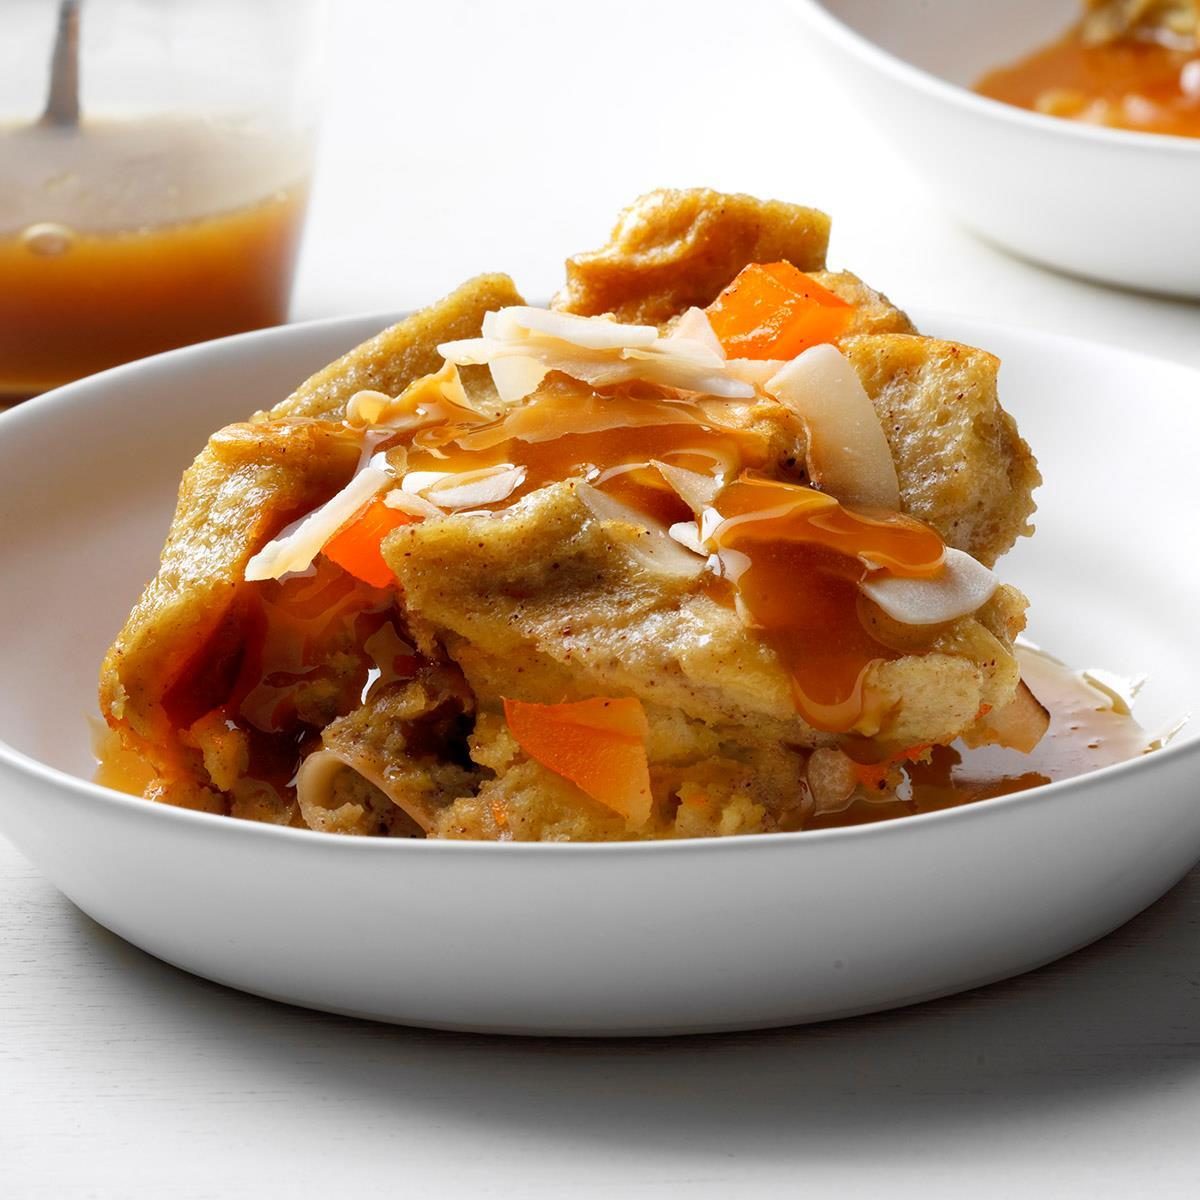 Runner Up: Coconut Mango Bread Pudding with Rum Sauce